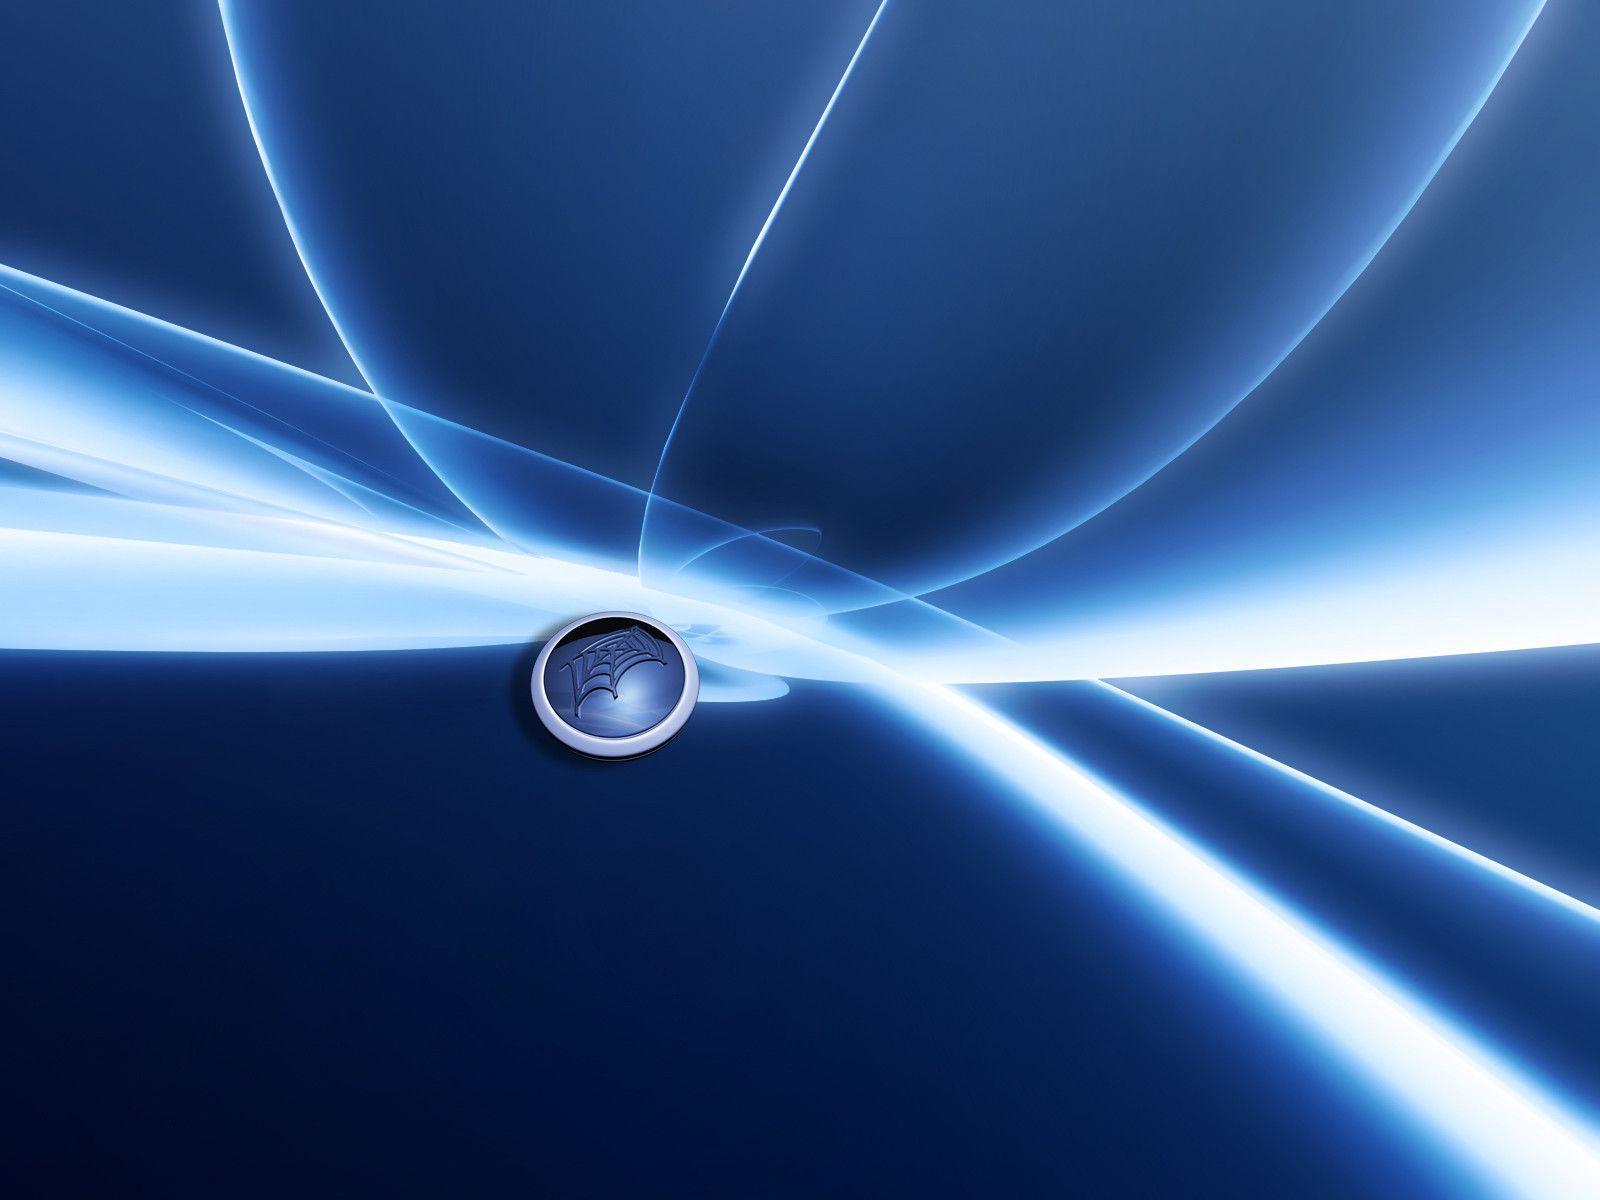 Hd Blue Abstract Wallpaper Widescreen 2 HD Wallpaper. Hdimges